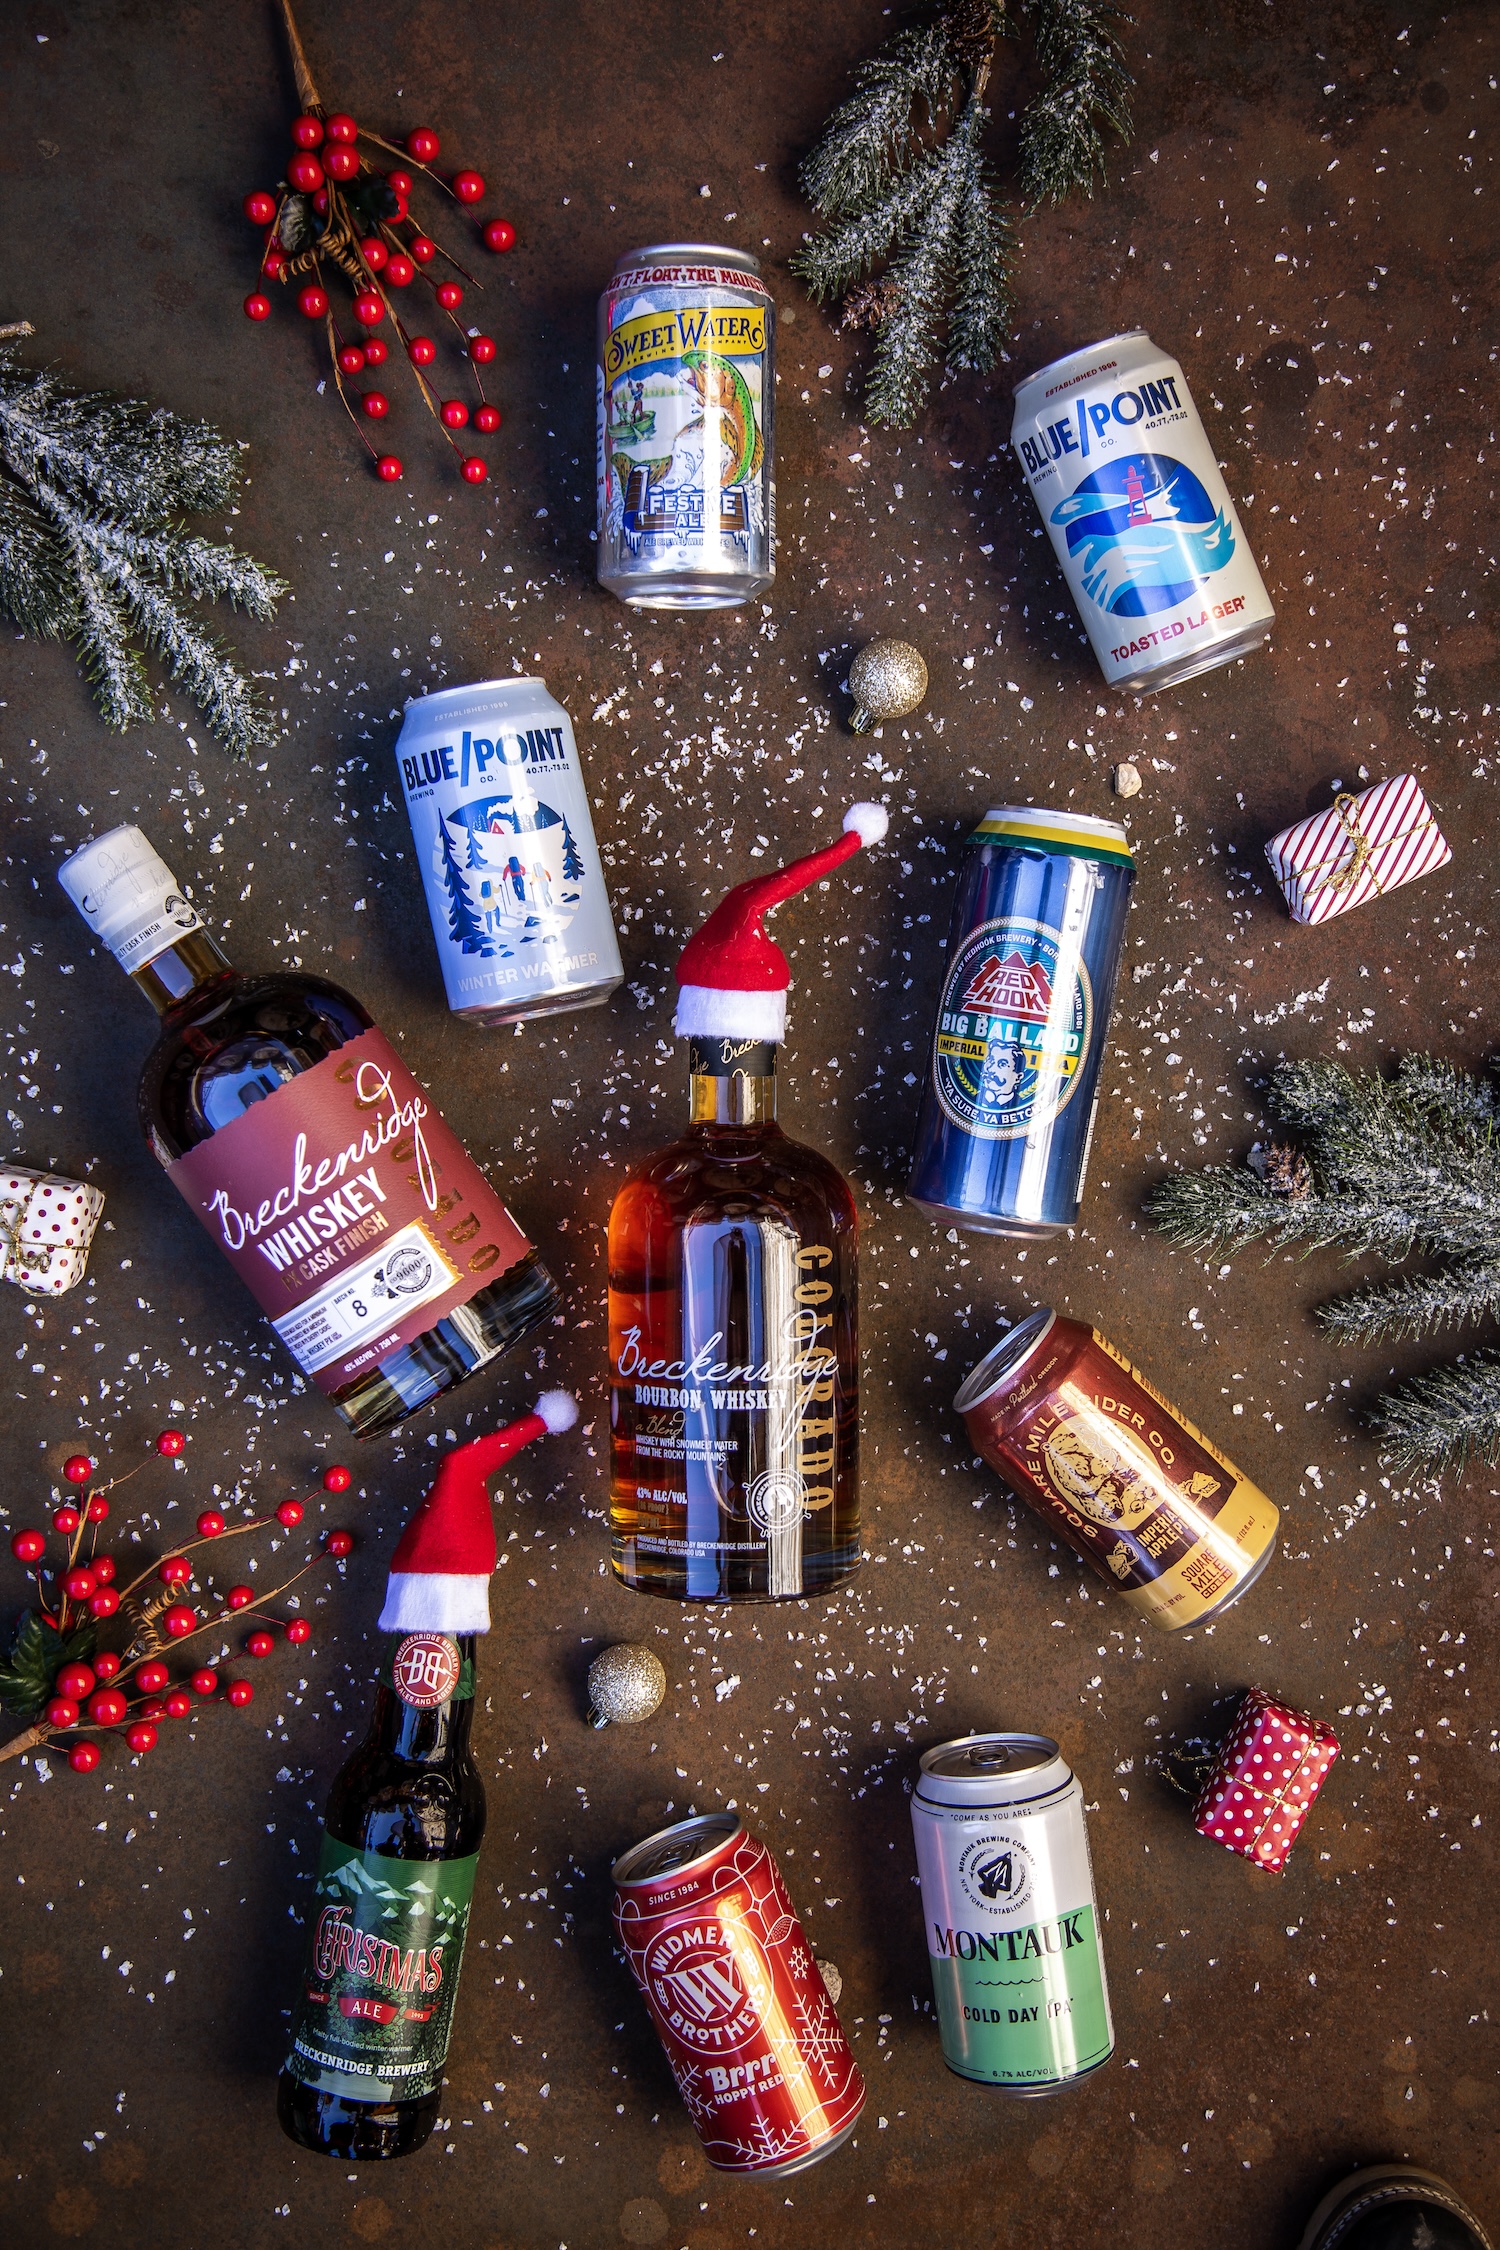 Celebrate the Holiday Season with the World’s Best Blended Whiskey and Award-Winning Craft Brews